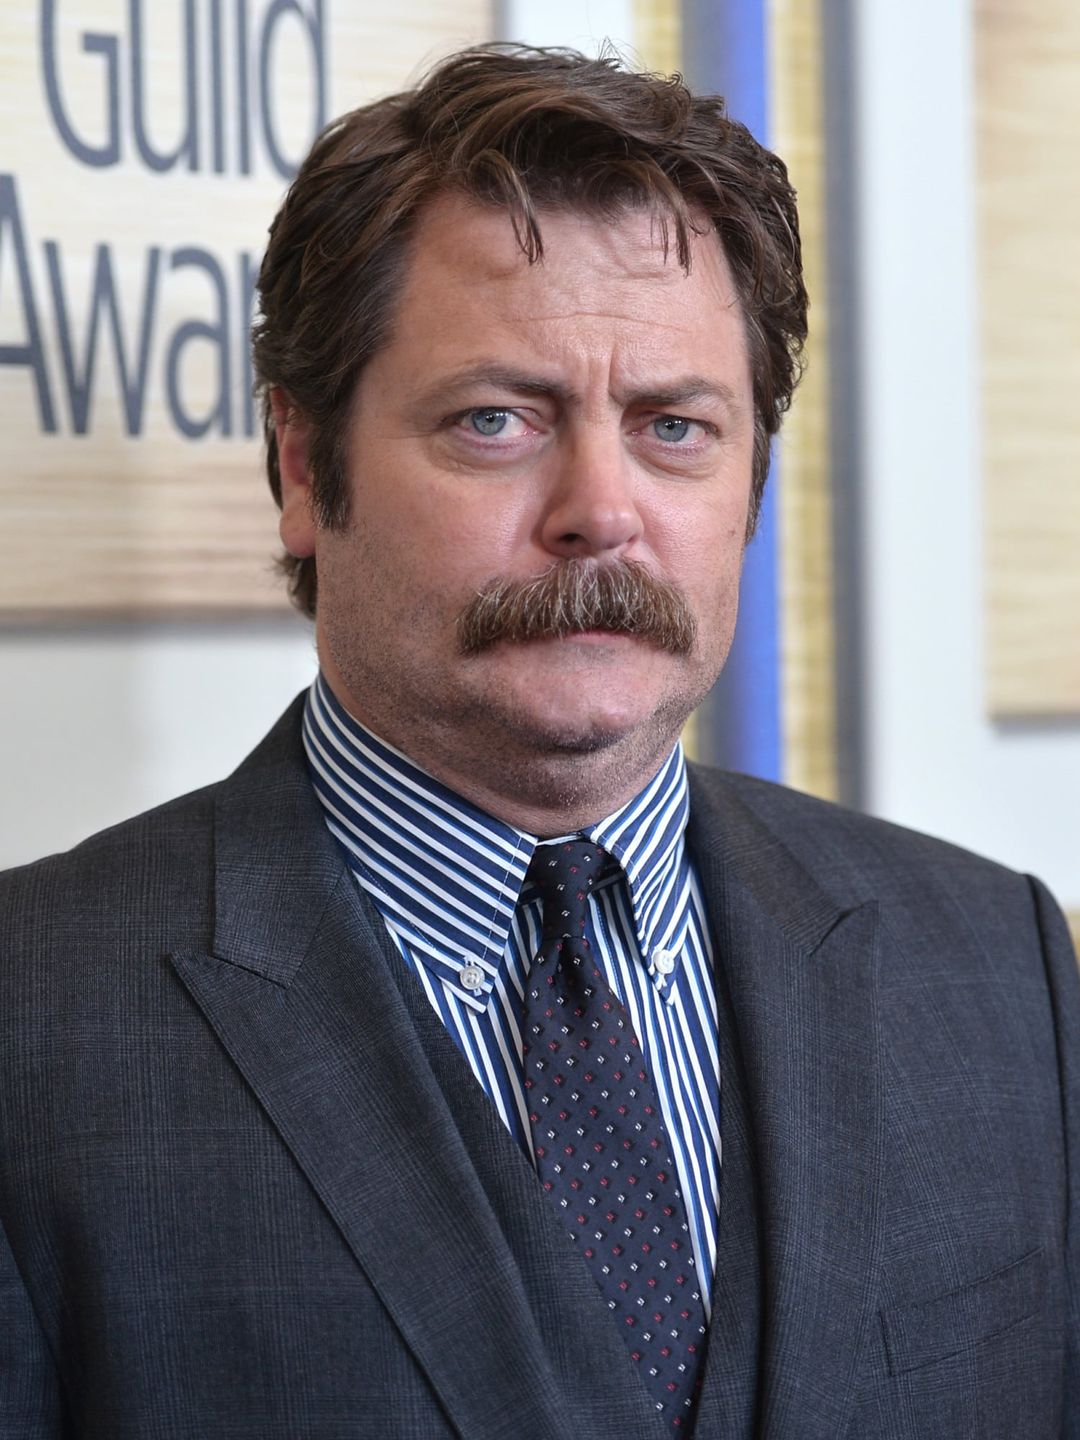 Nick Offerman early life